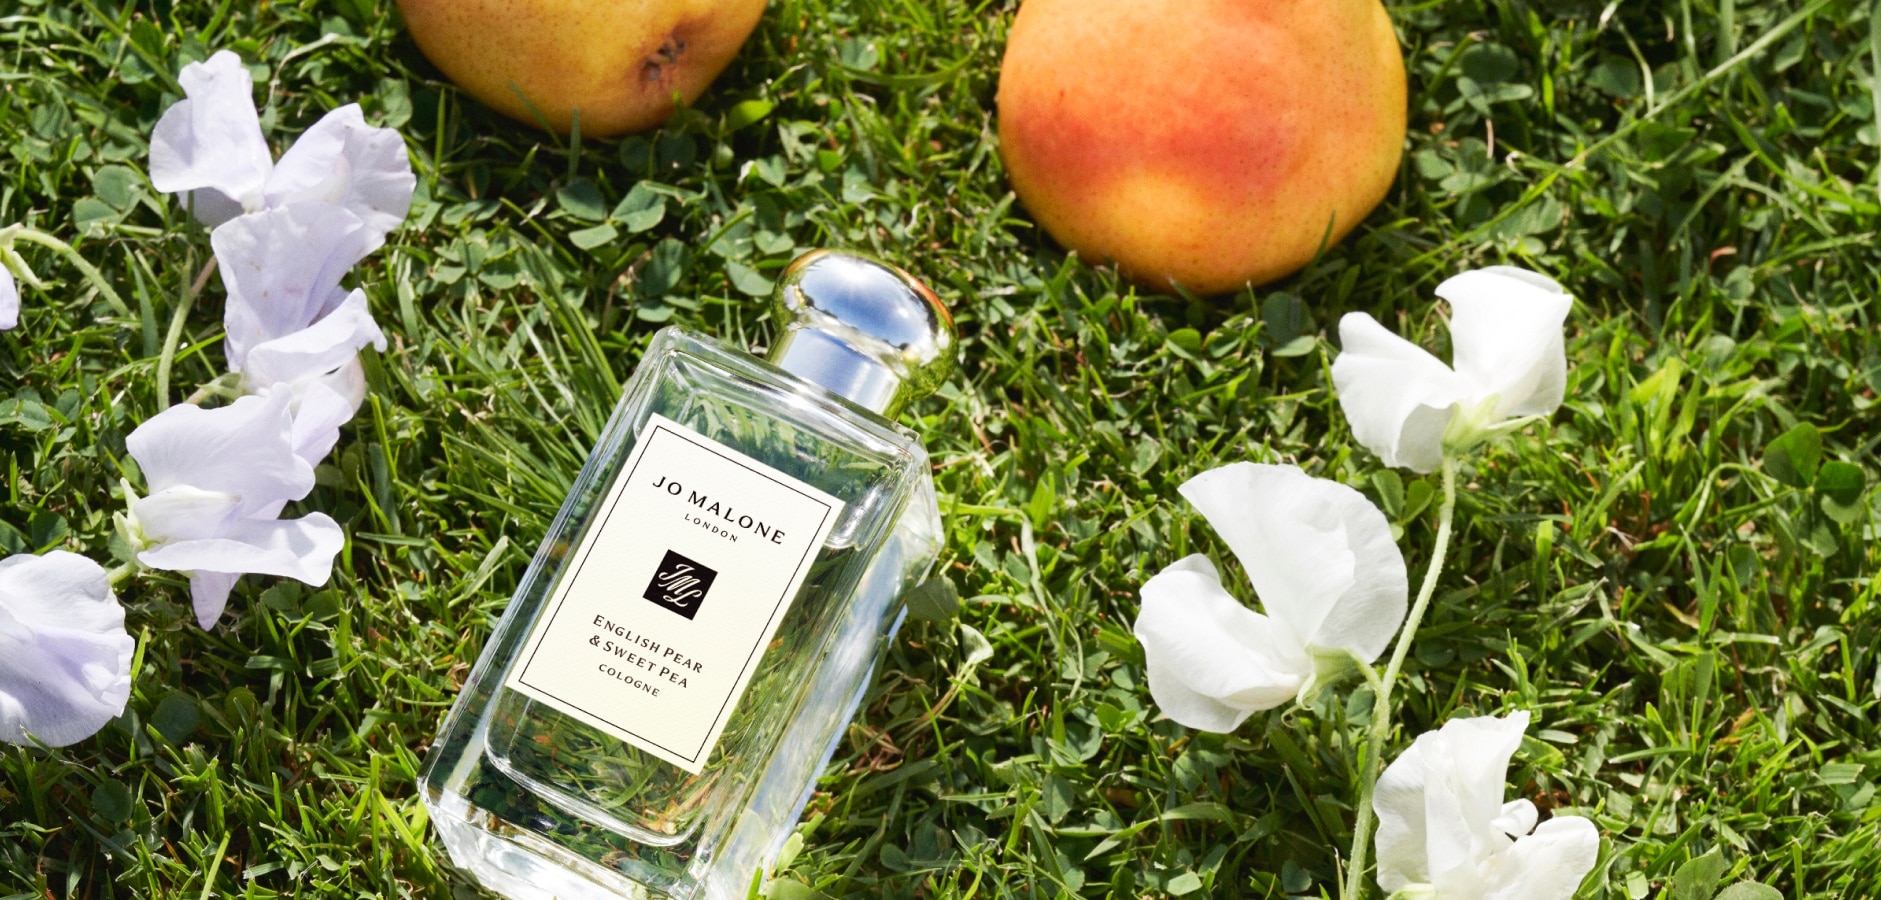 Jo Malone London English Pear & Sweet Pea Colognes lying on grass surrounded by pears and white flowers